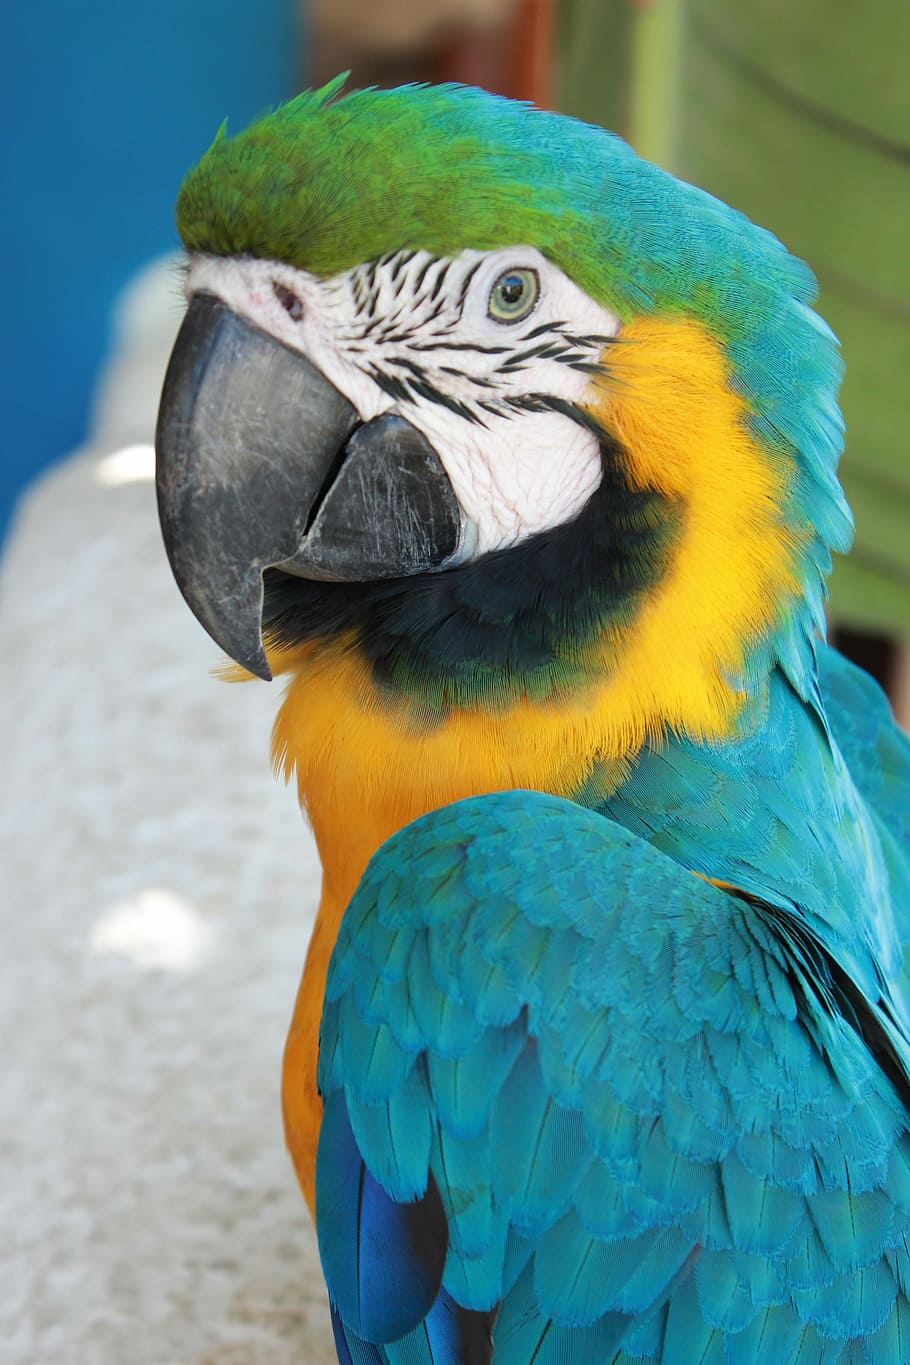 Macaw, Parrot, Bird, Animal, blue, colorful, nature, wildlife, tropical, yellow